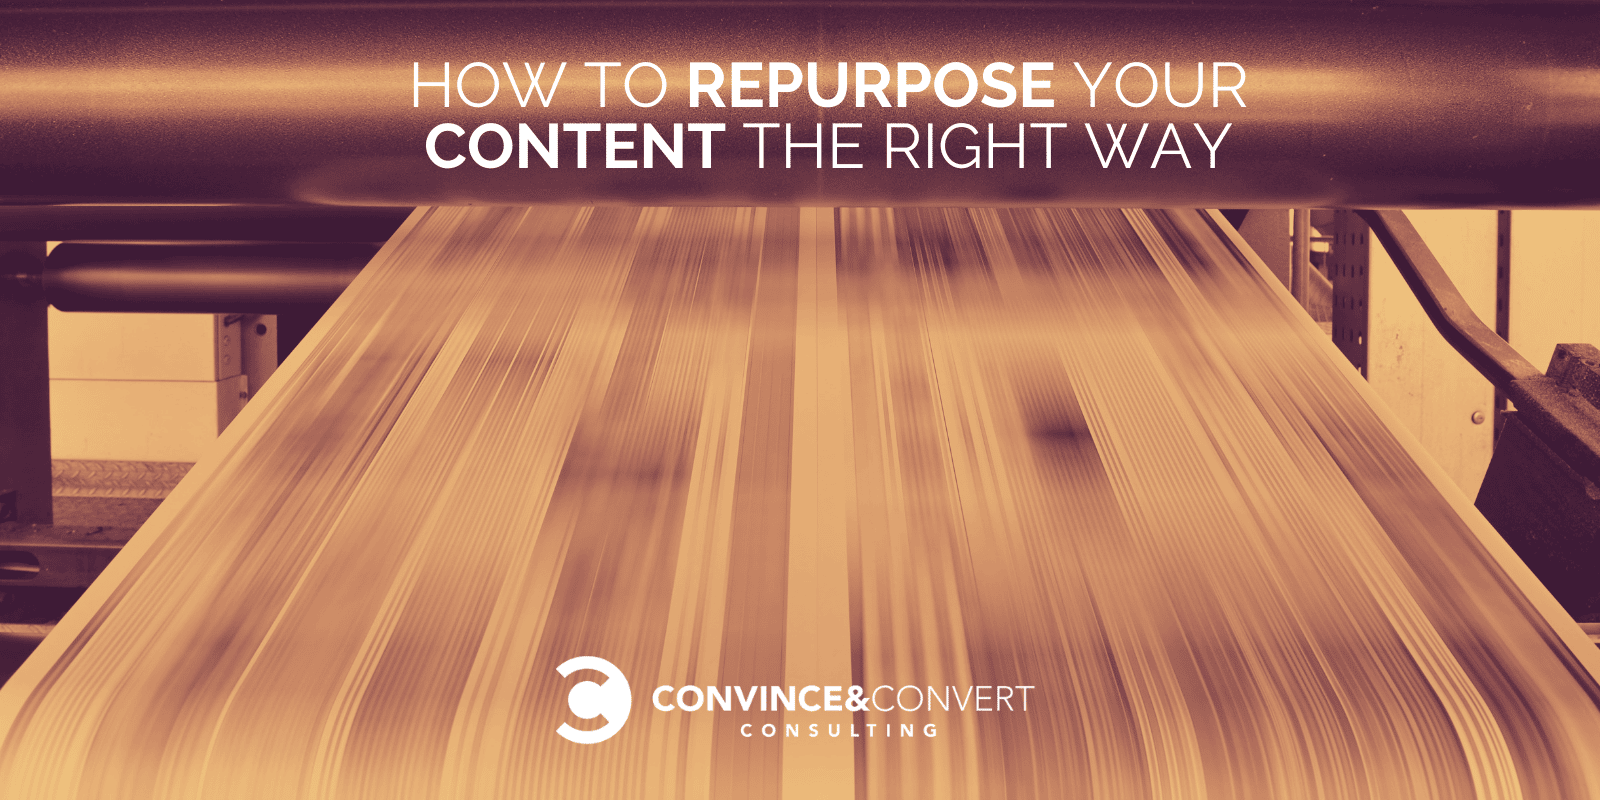 Why should you repurpose content?